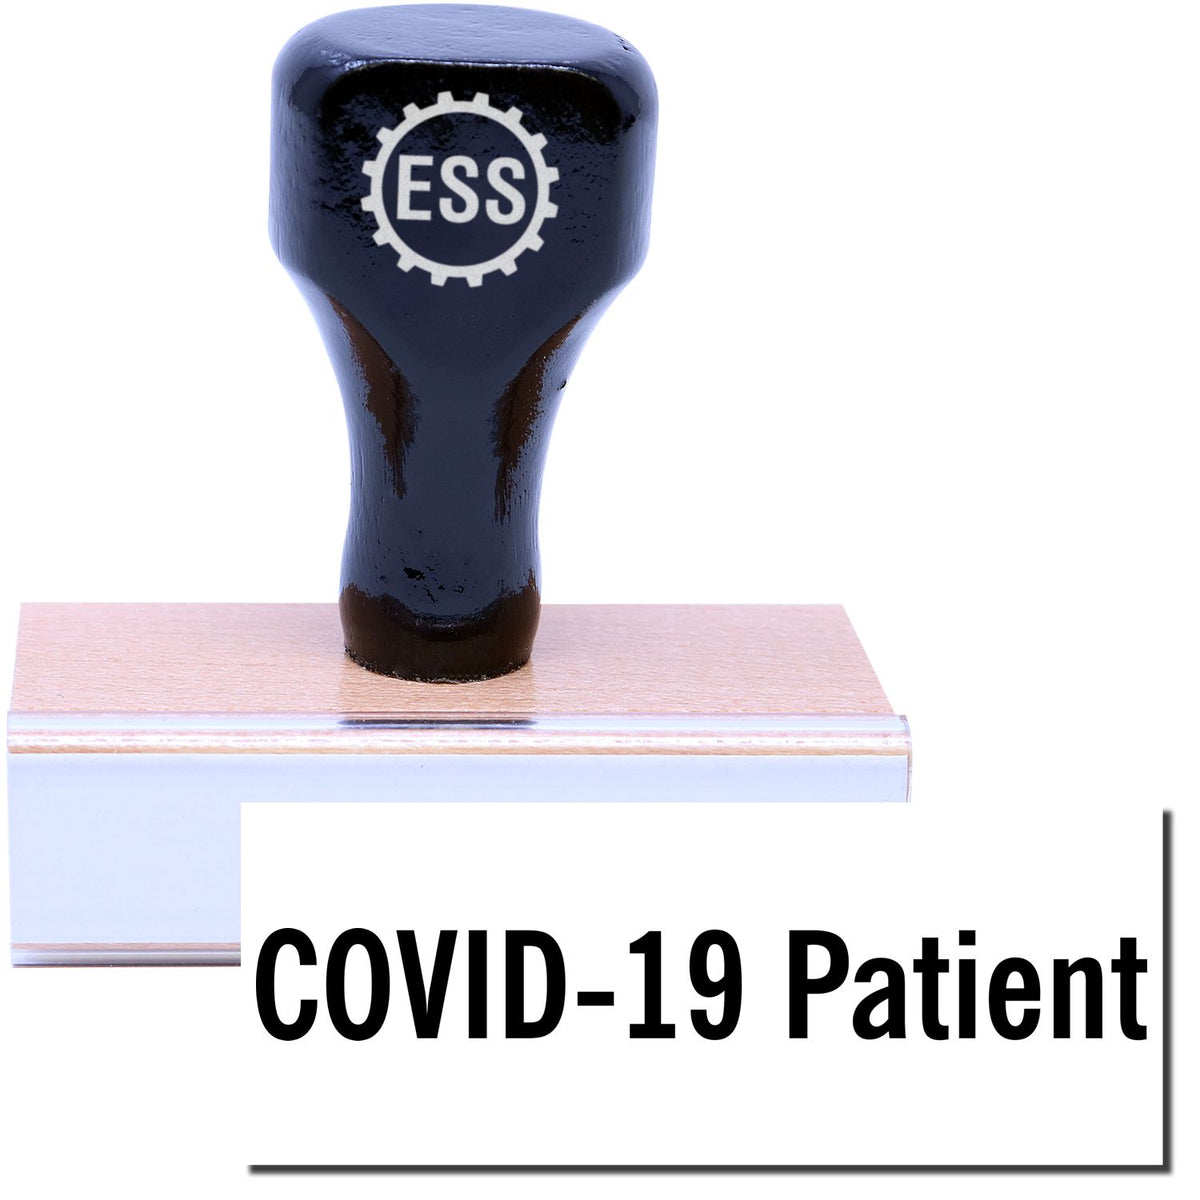 A stock office rubber stamp with a stamped image showing how the text &quot;COVID-19 Patient&quot; is displayed after stamping.